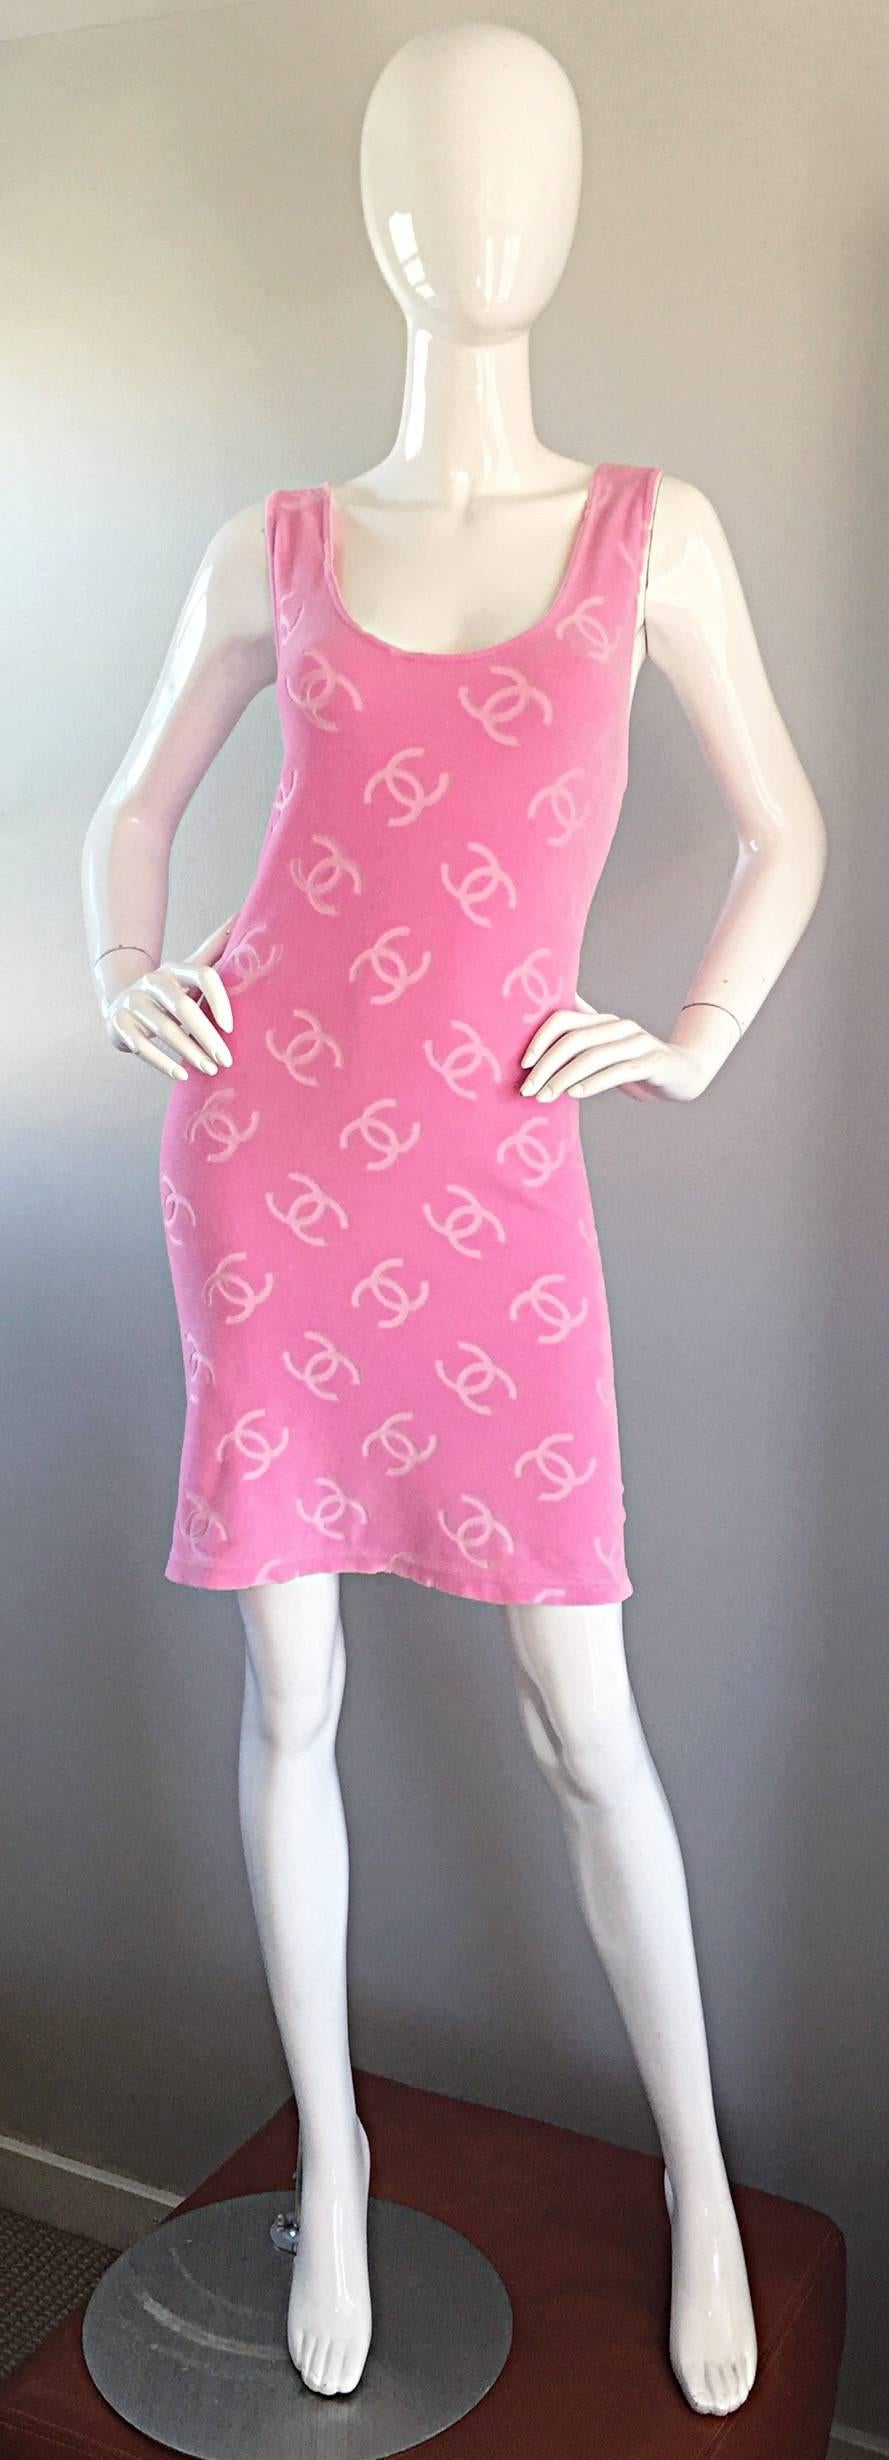 Super rare, and incredibly important vintage 90s CHANEL terrycloth dress! From one of the most iconic Chanel collections in history (1996), where over the top was an understatement! Features an allover print of the legendary CC logo throughout. Not